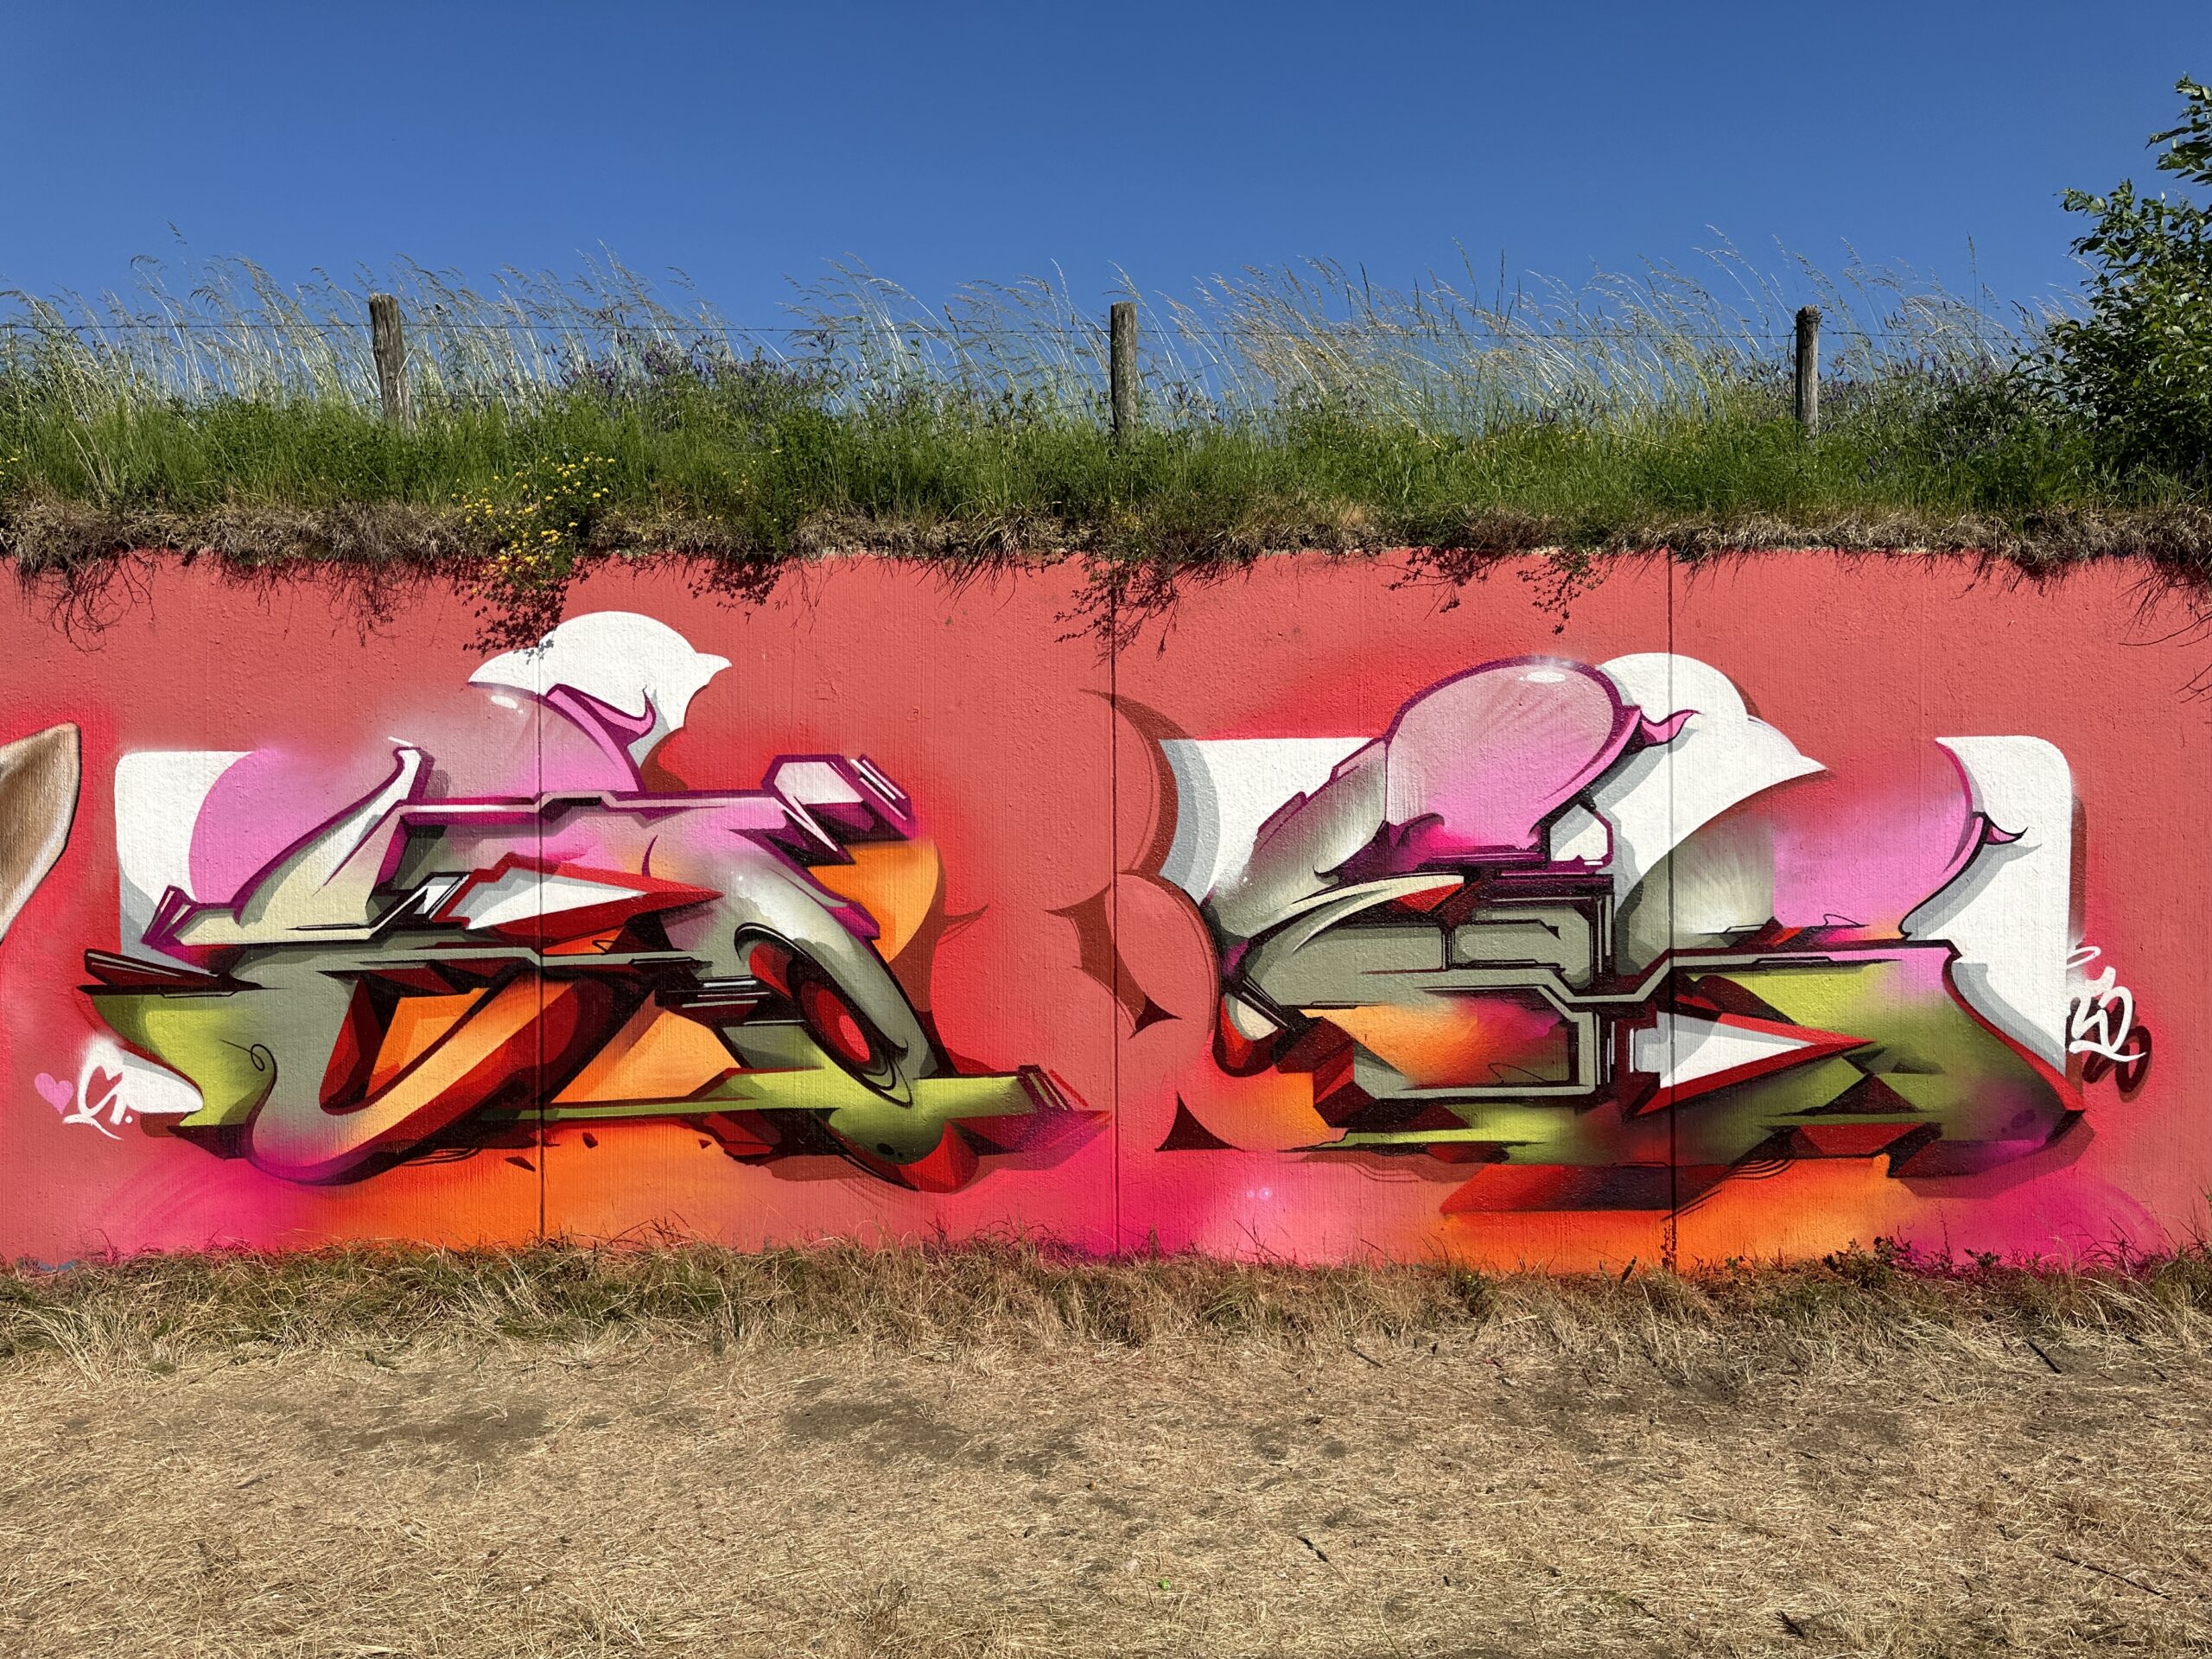 A work by Does - Geleen, the Netherlands '23